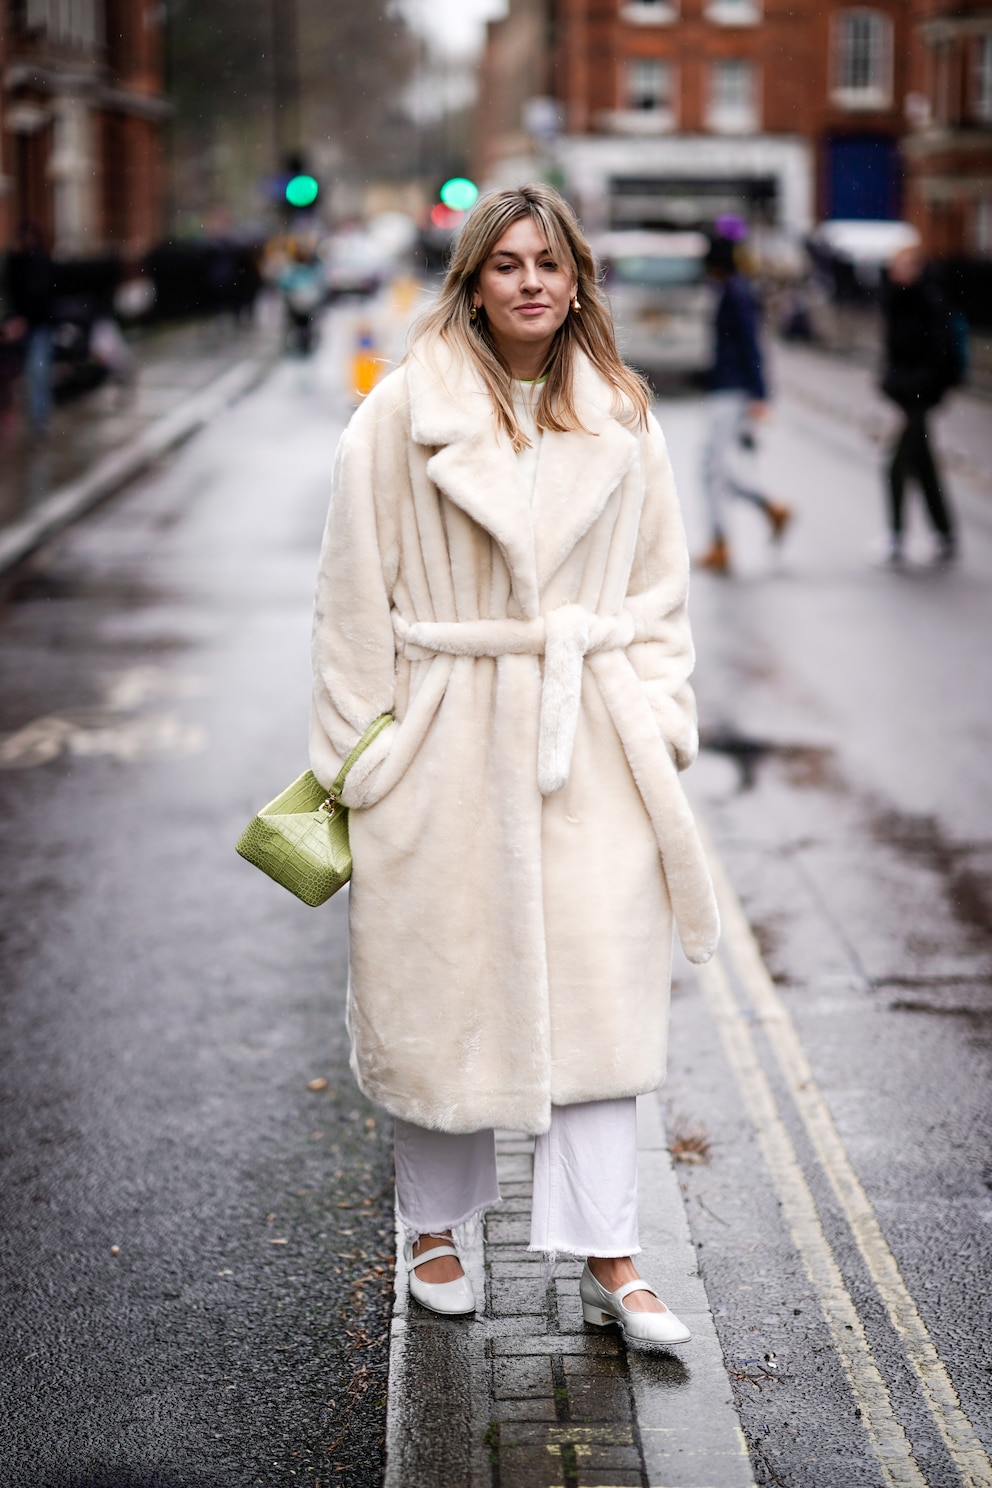 LONDON, ENGLAND - FEBRUARY 18: A guest wears earrings, a white fluffy coat, a lime green rectangular box bag, white pants, white ballerinas, during London Fashion Week February 2019 on February 18, 2019 in London, England. (Photo by Edward Berthelot/Getty Images)